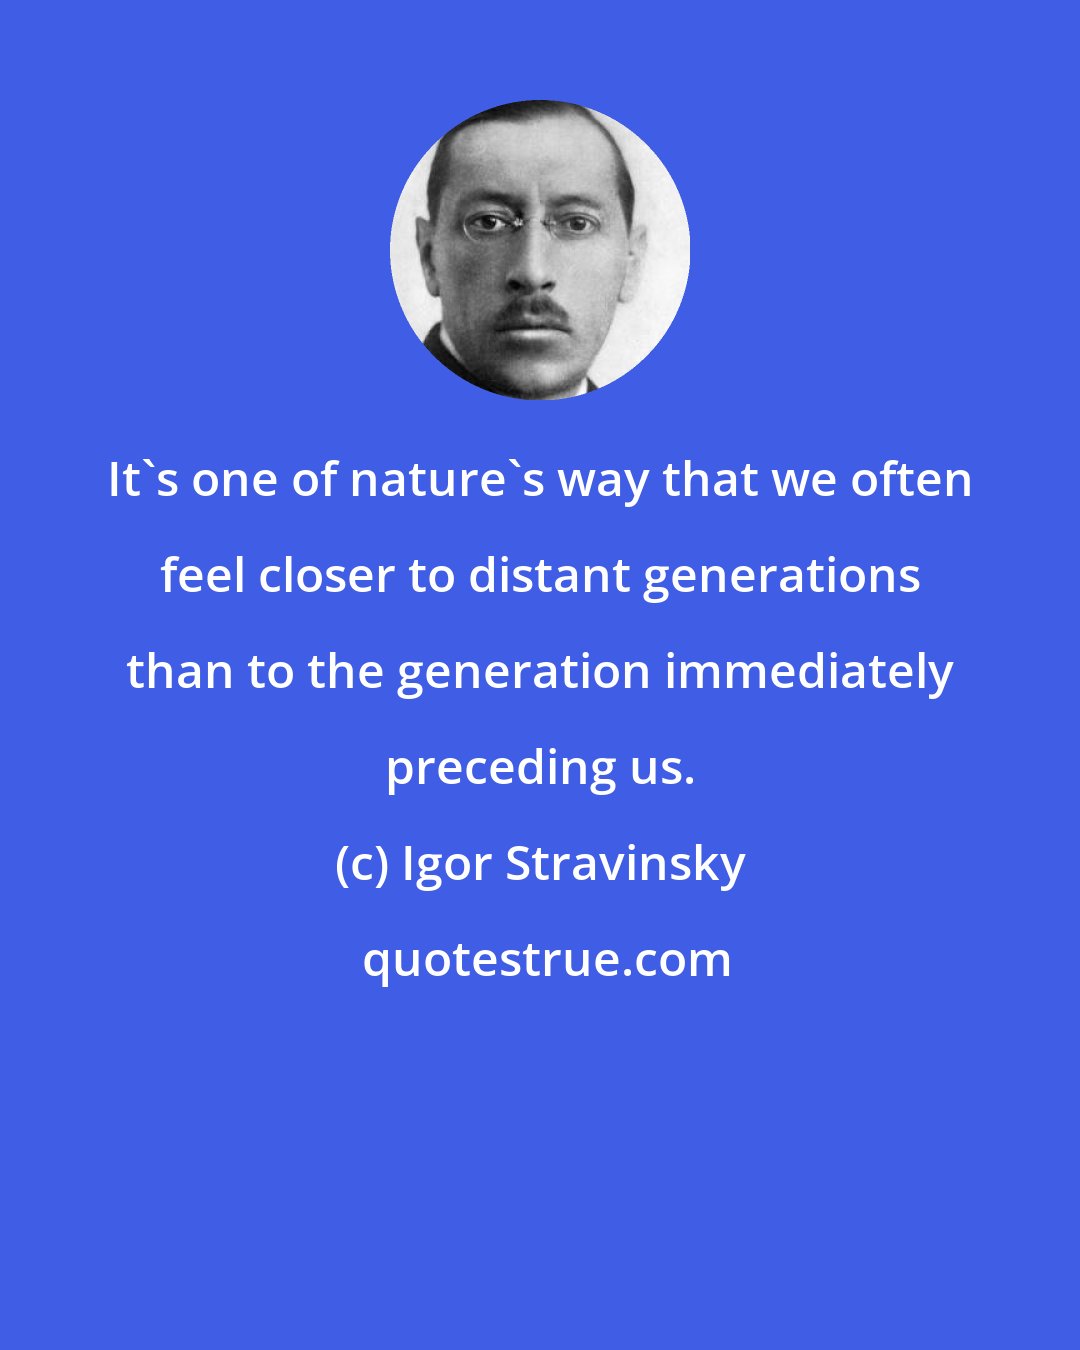 Igor Stravinsky: It's one of nature's way that we often feel closer to distant generations than to the generation immediately preceding us.